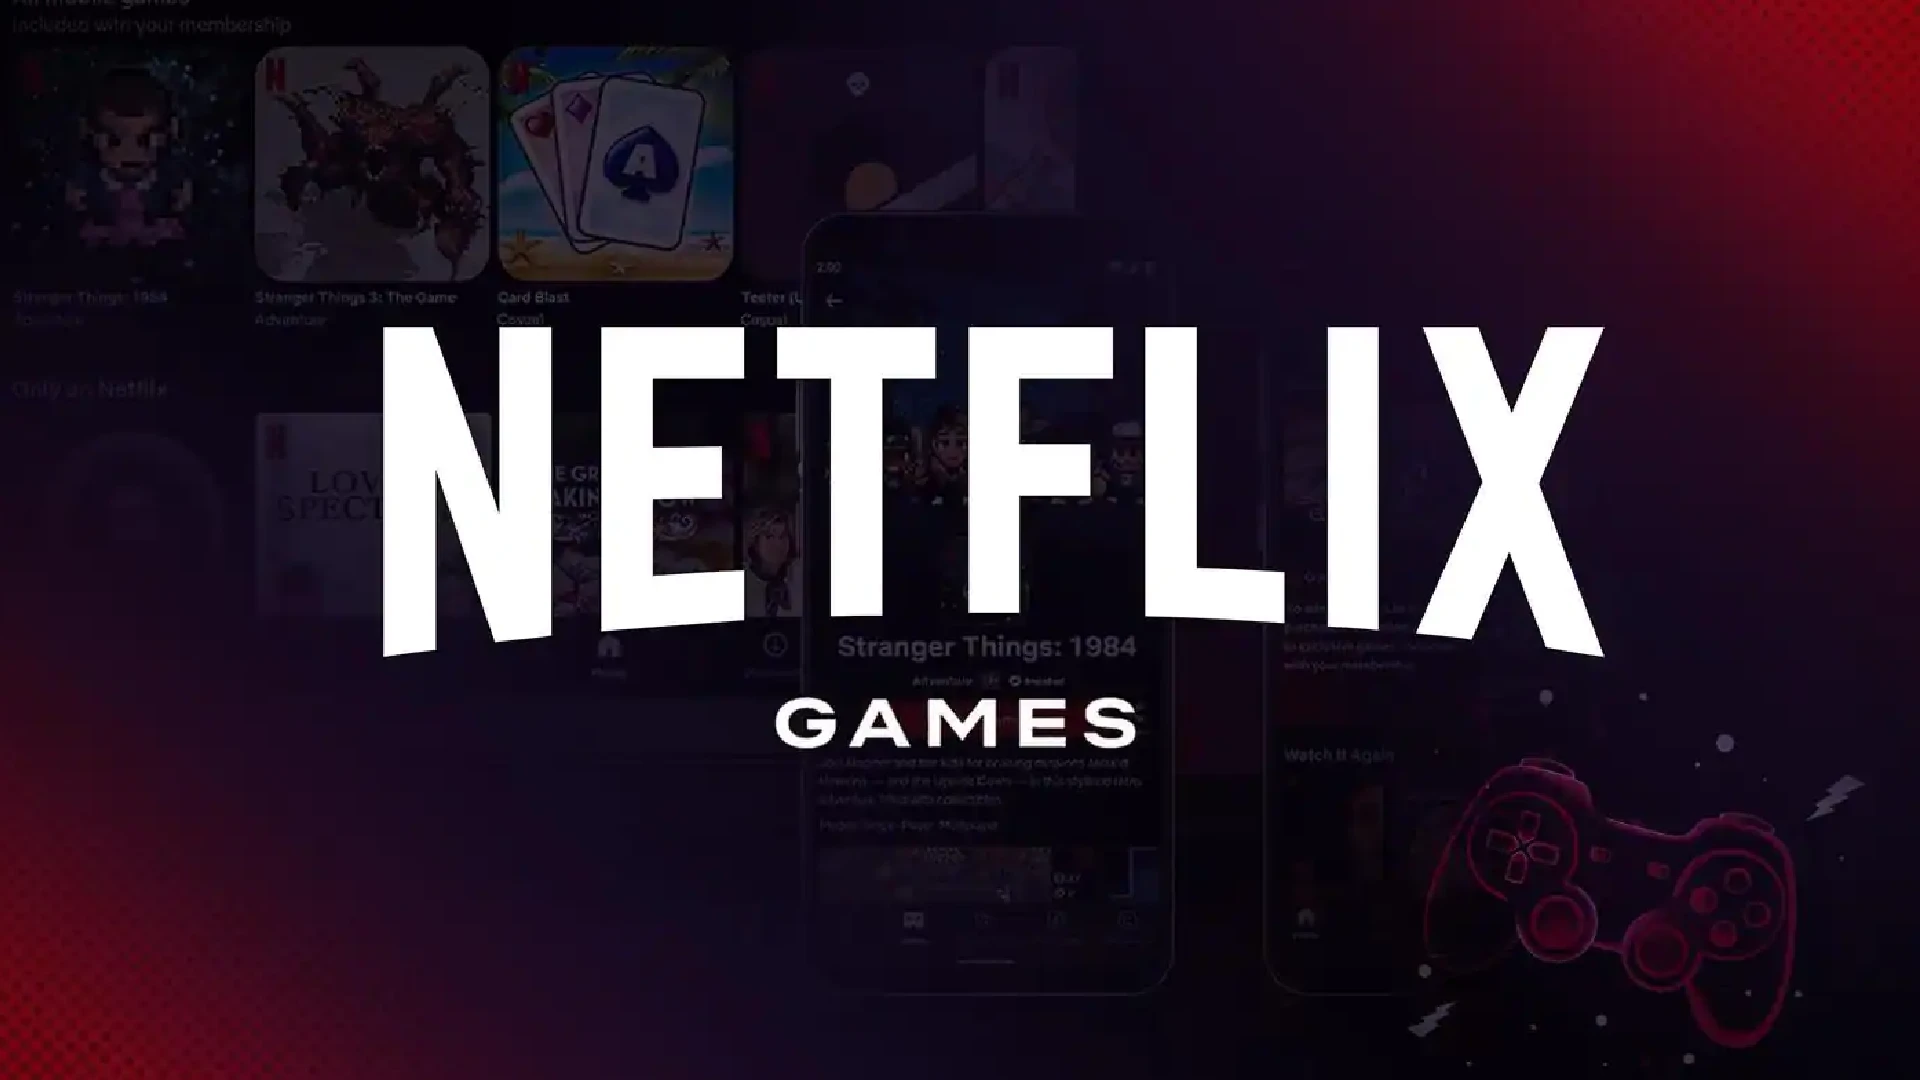 Netflix has acquired Next Games for €65 million